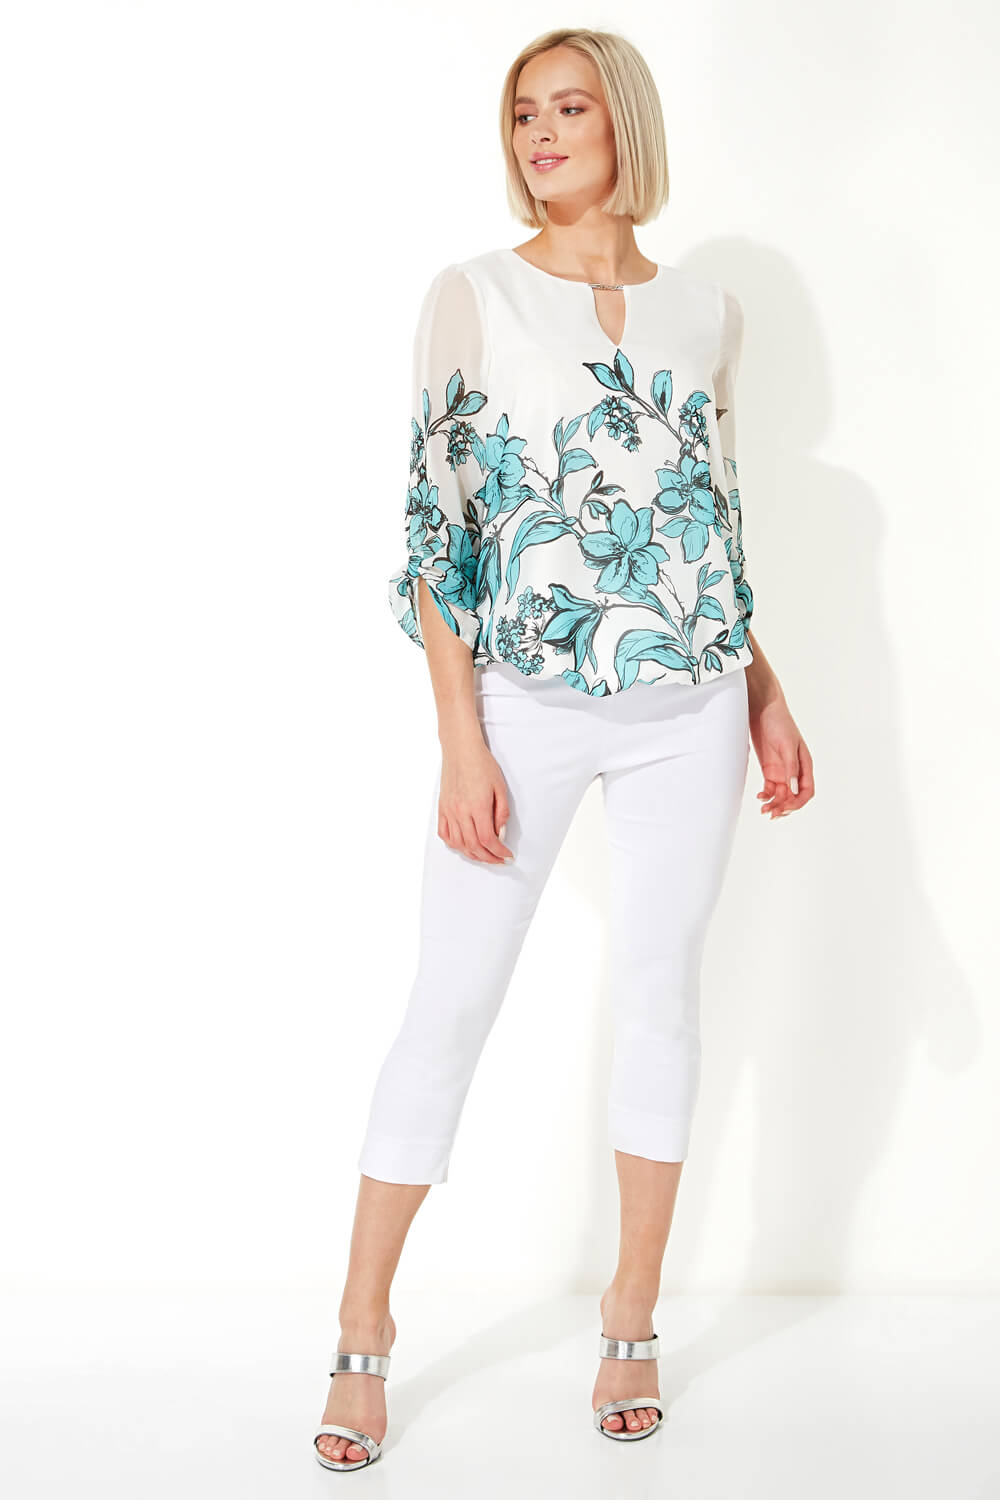 Turquoise Floral Border Print Top, Image 2 of 4